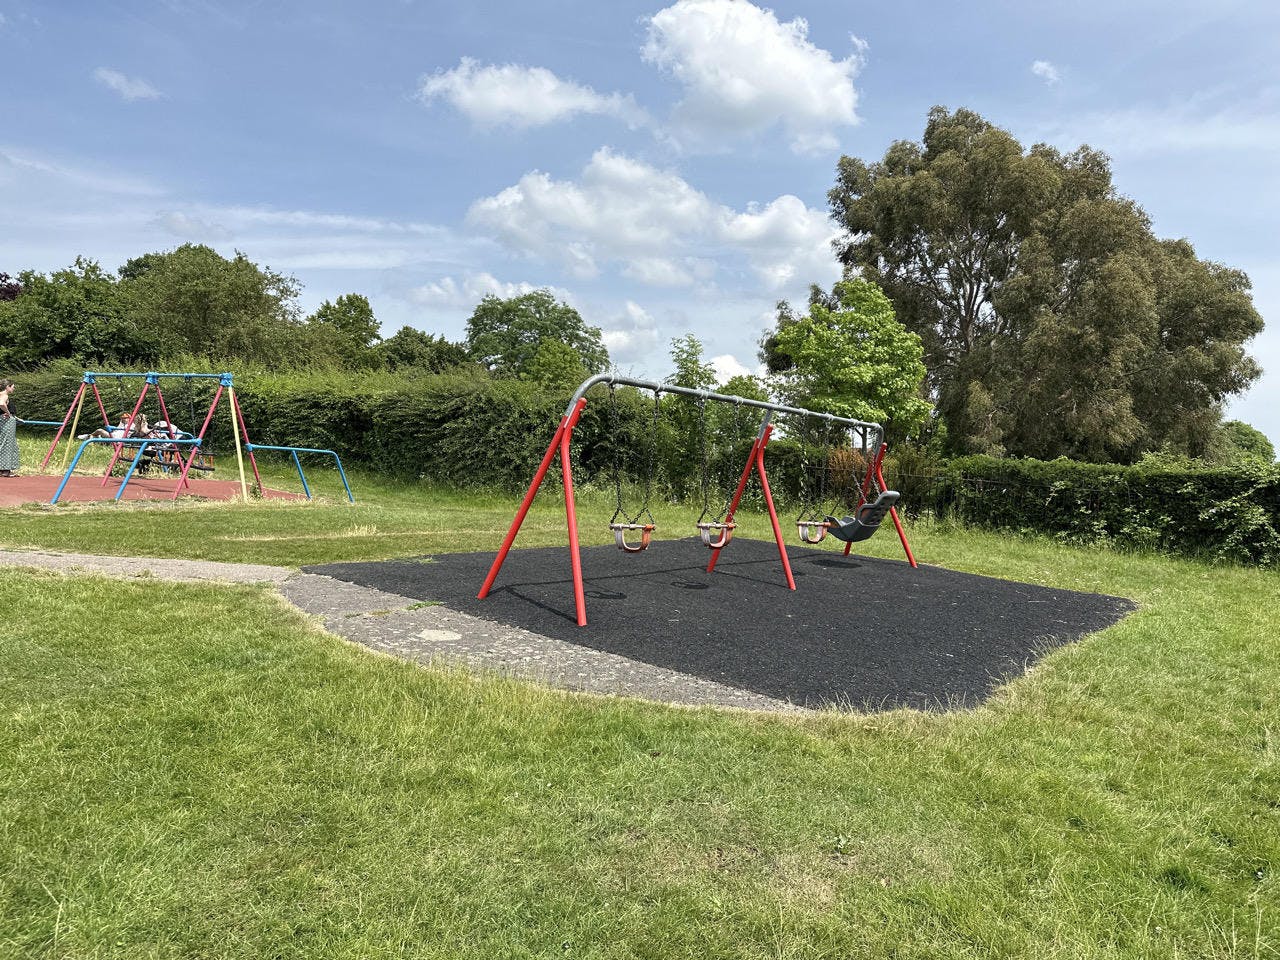 Chalkwell Park Existing Play Area